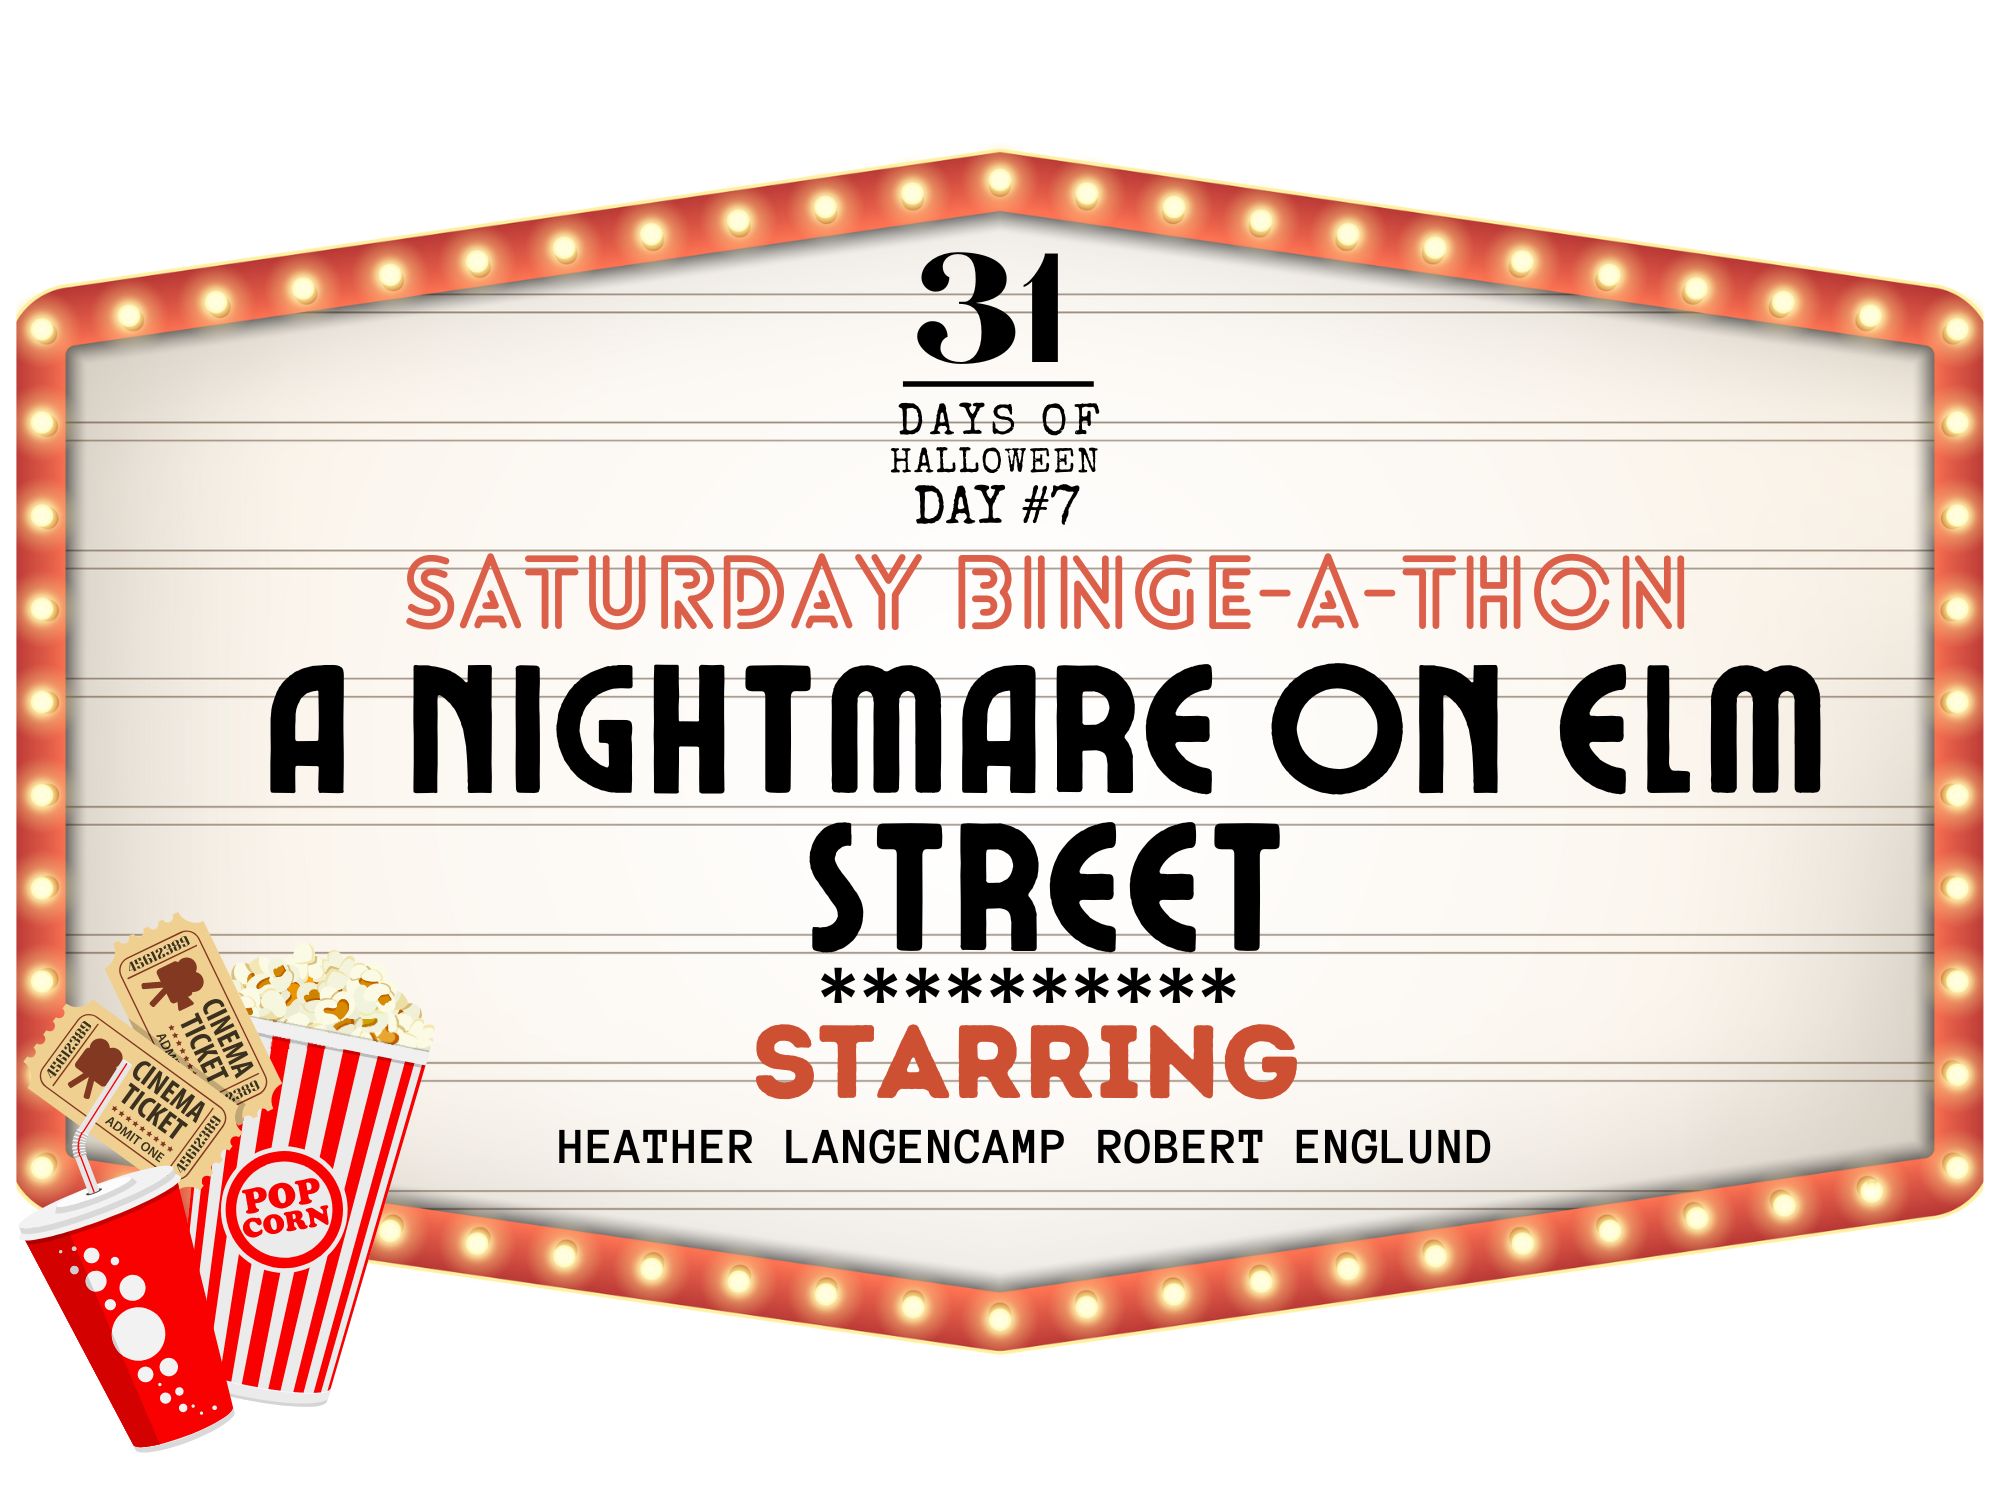 31 Days of Halloween: Day #7 Bing-A-thon, A Nightmare on Elm Street